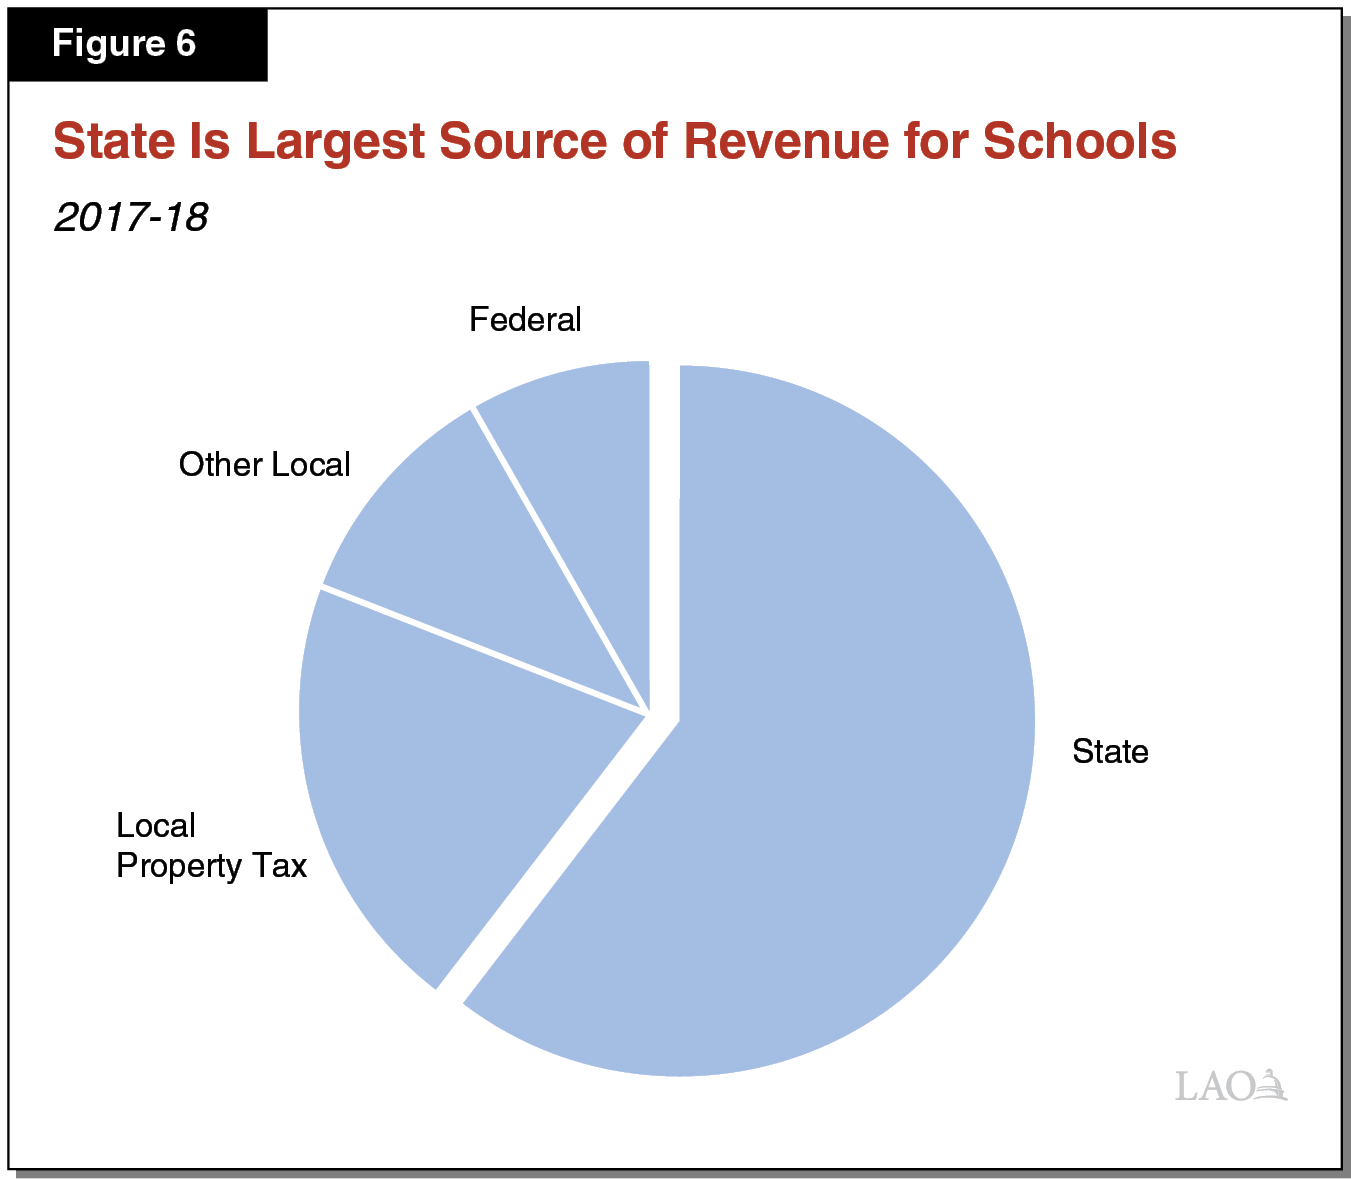 Figure 6 - State Is Largest Source of Revenue for Schools